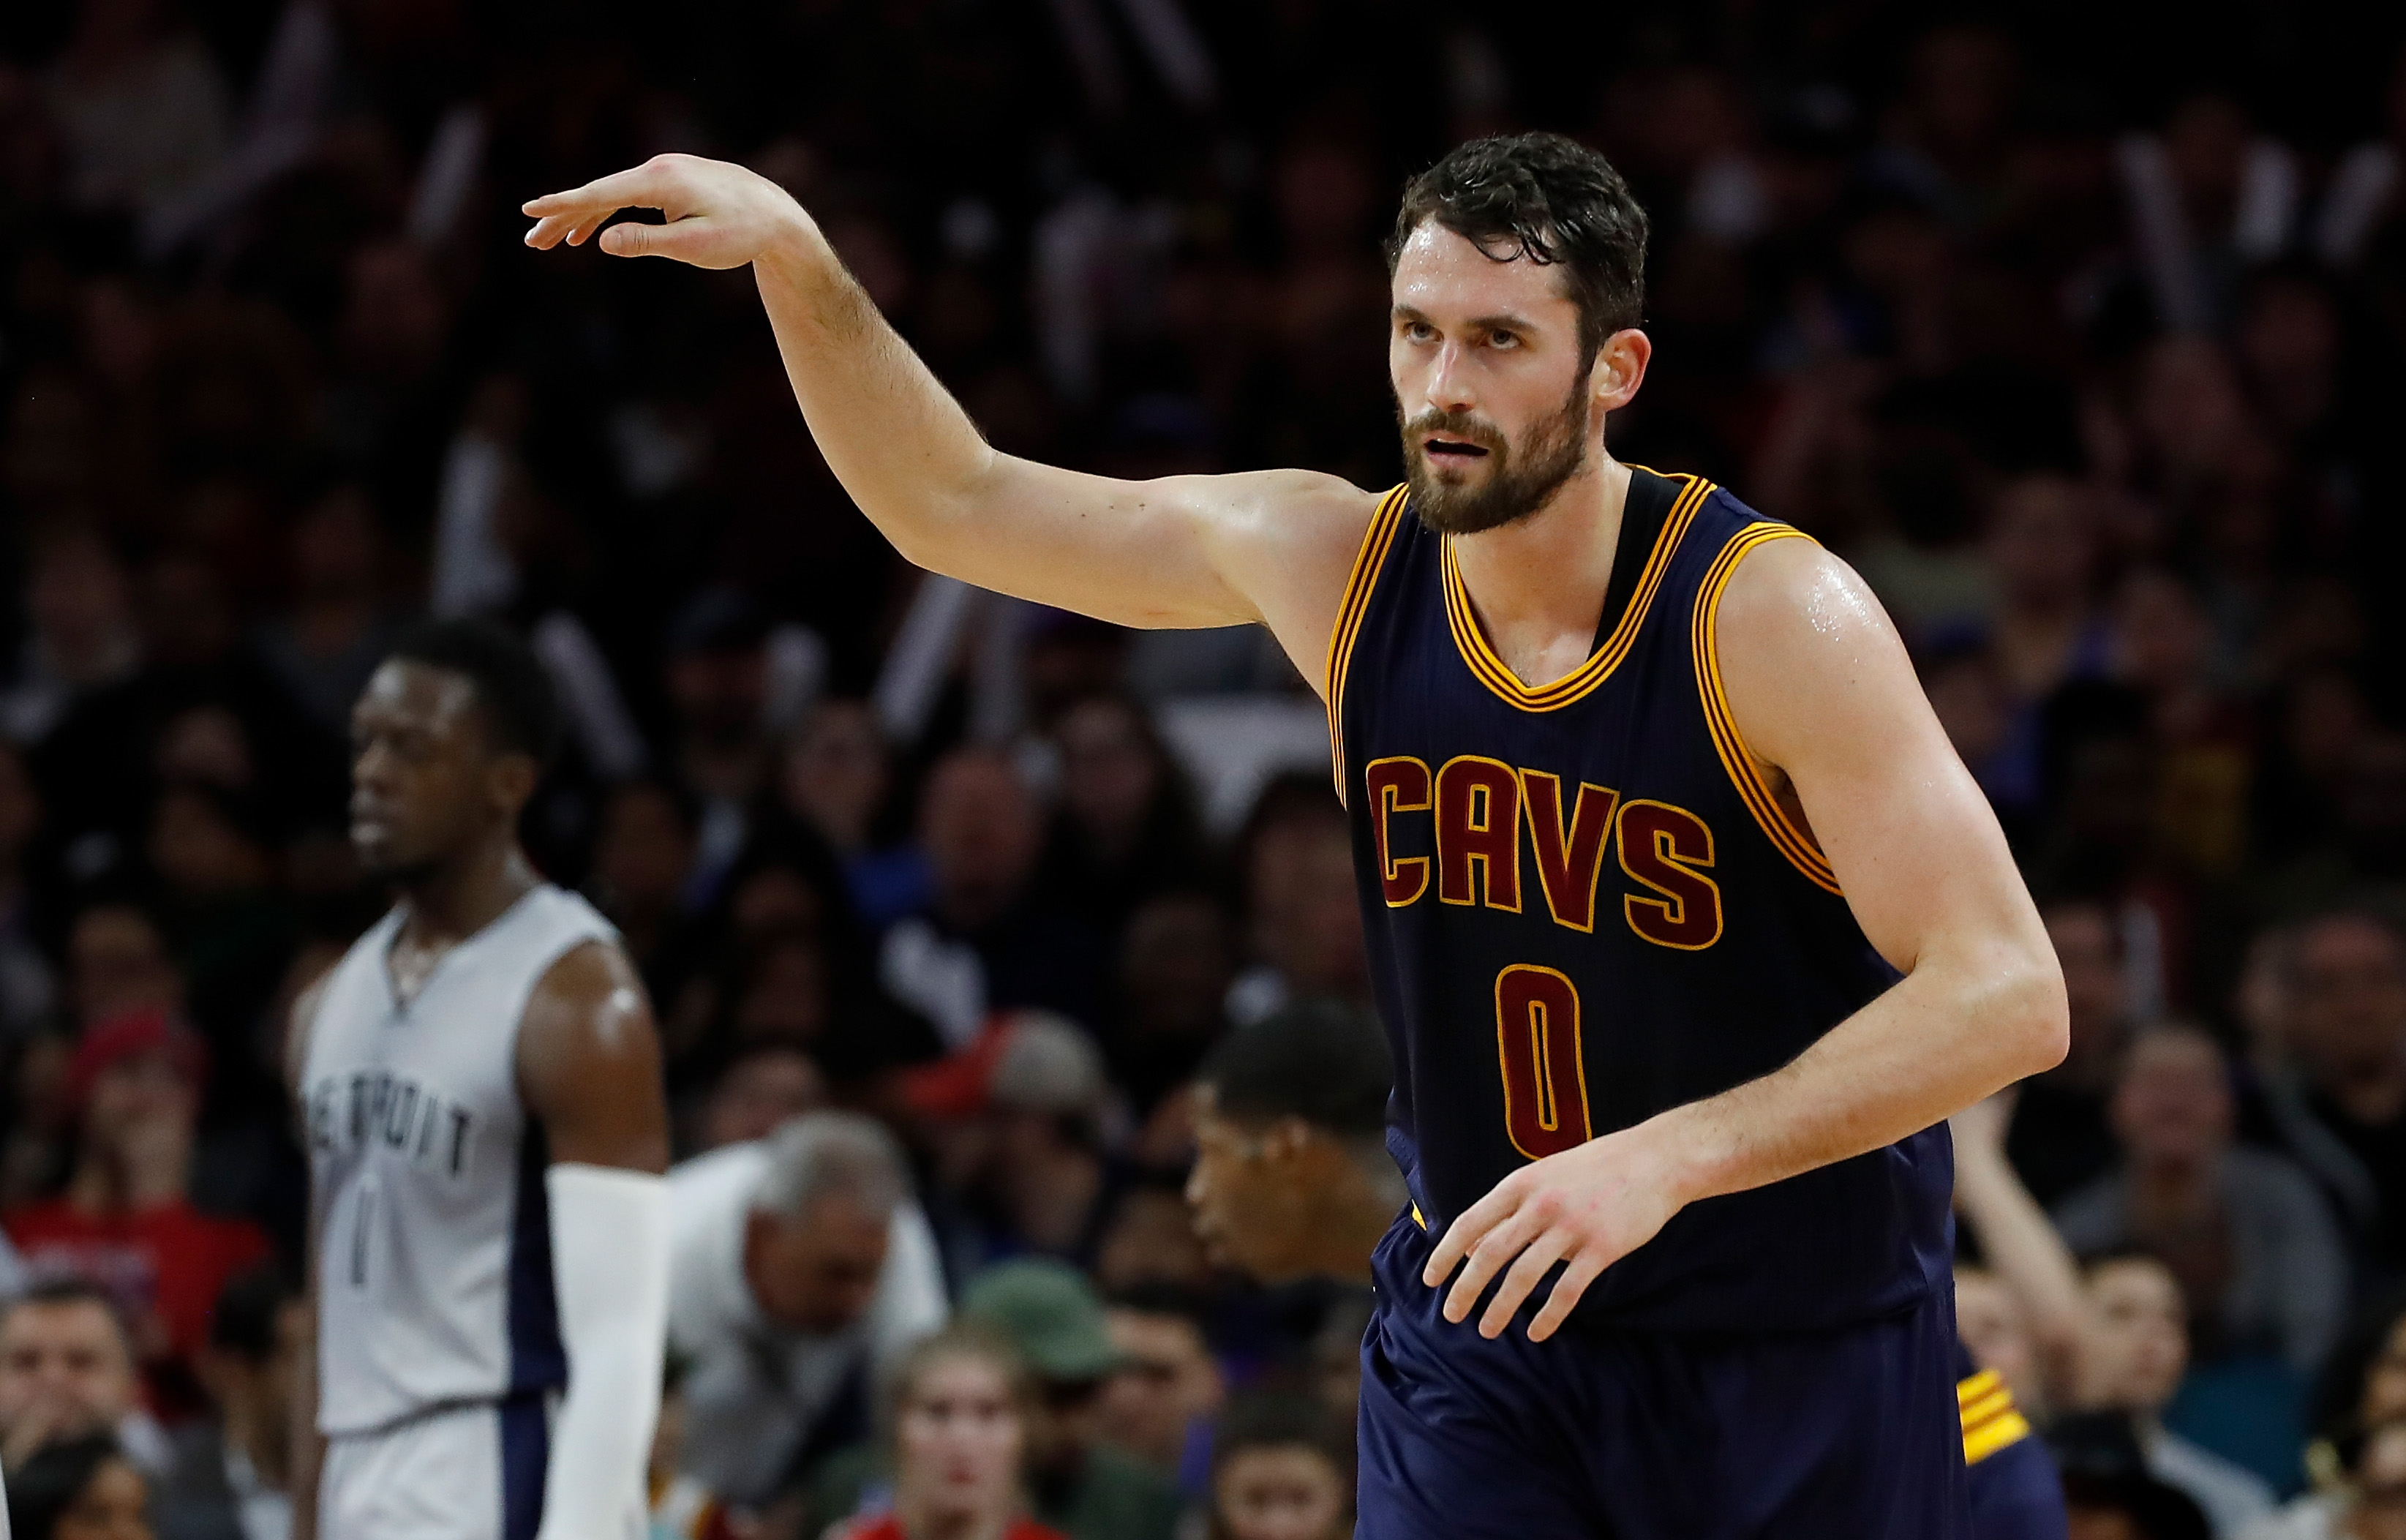 kevin love girlfriend, kevin love net worth, kevin love family